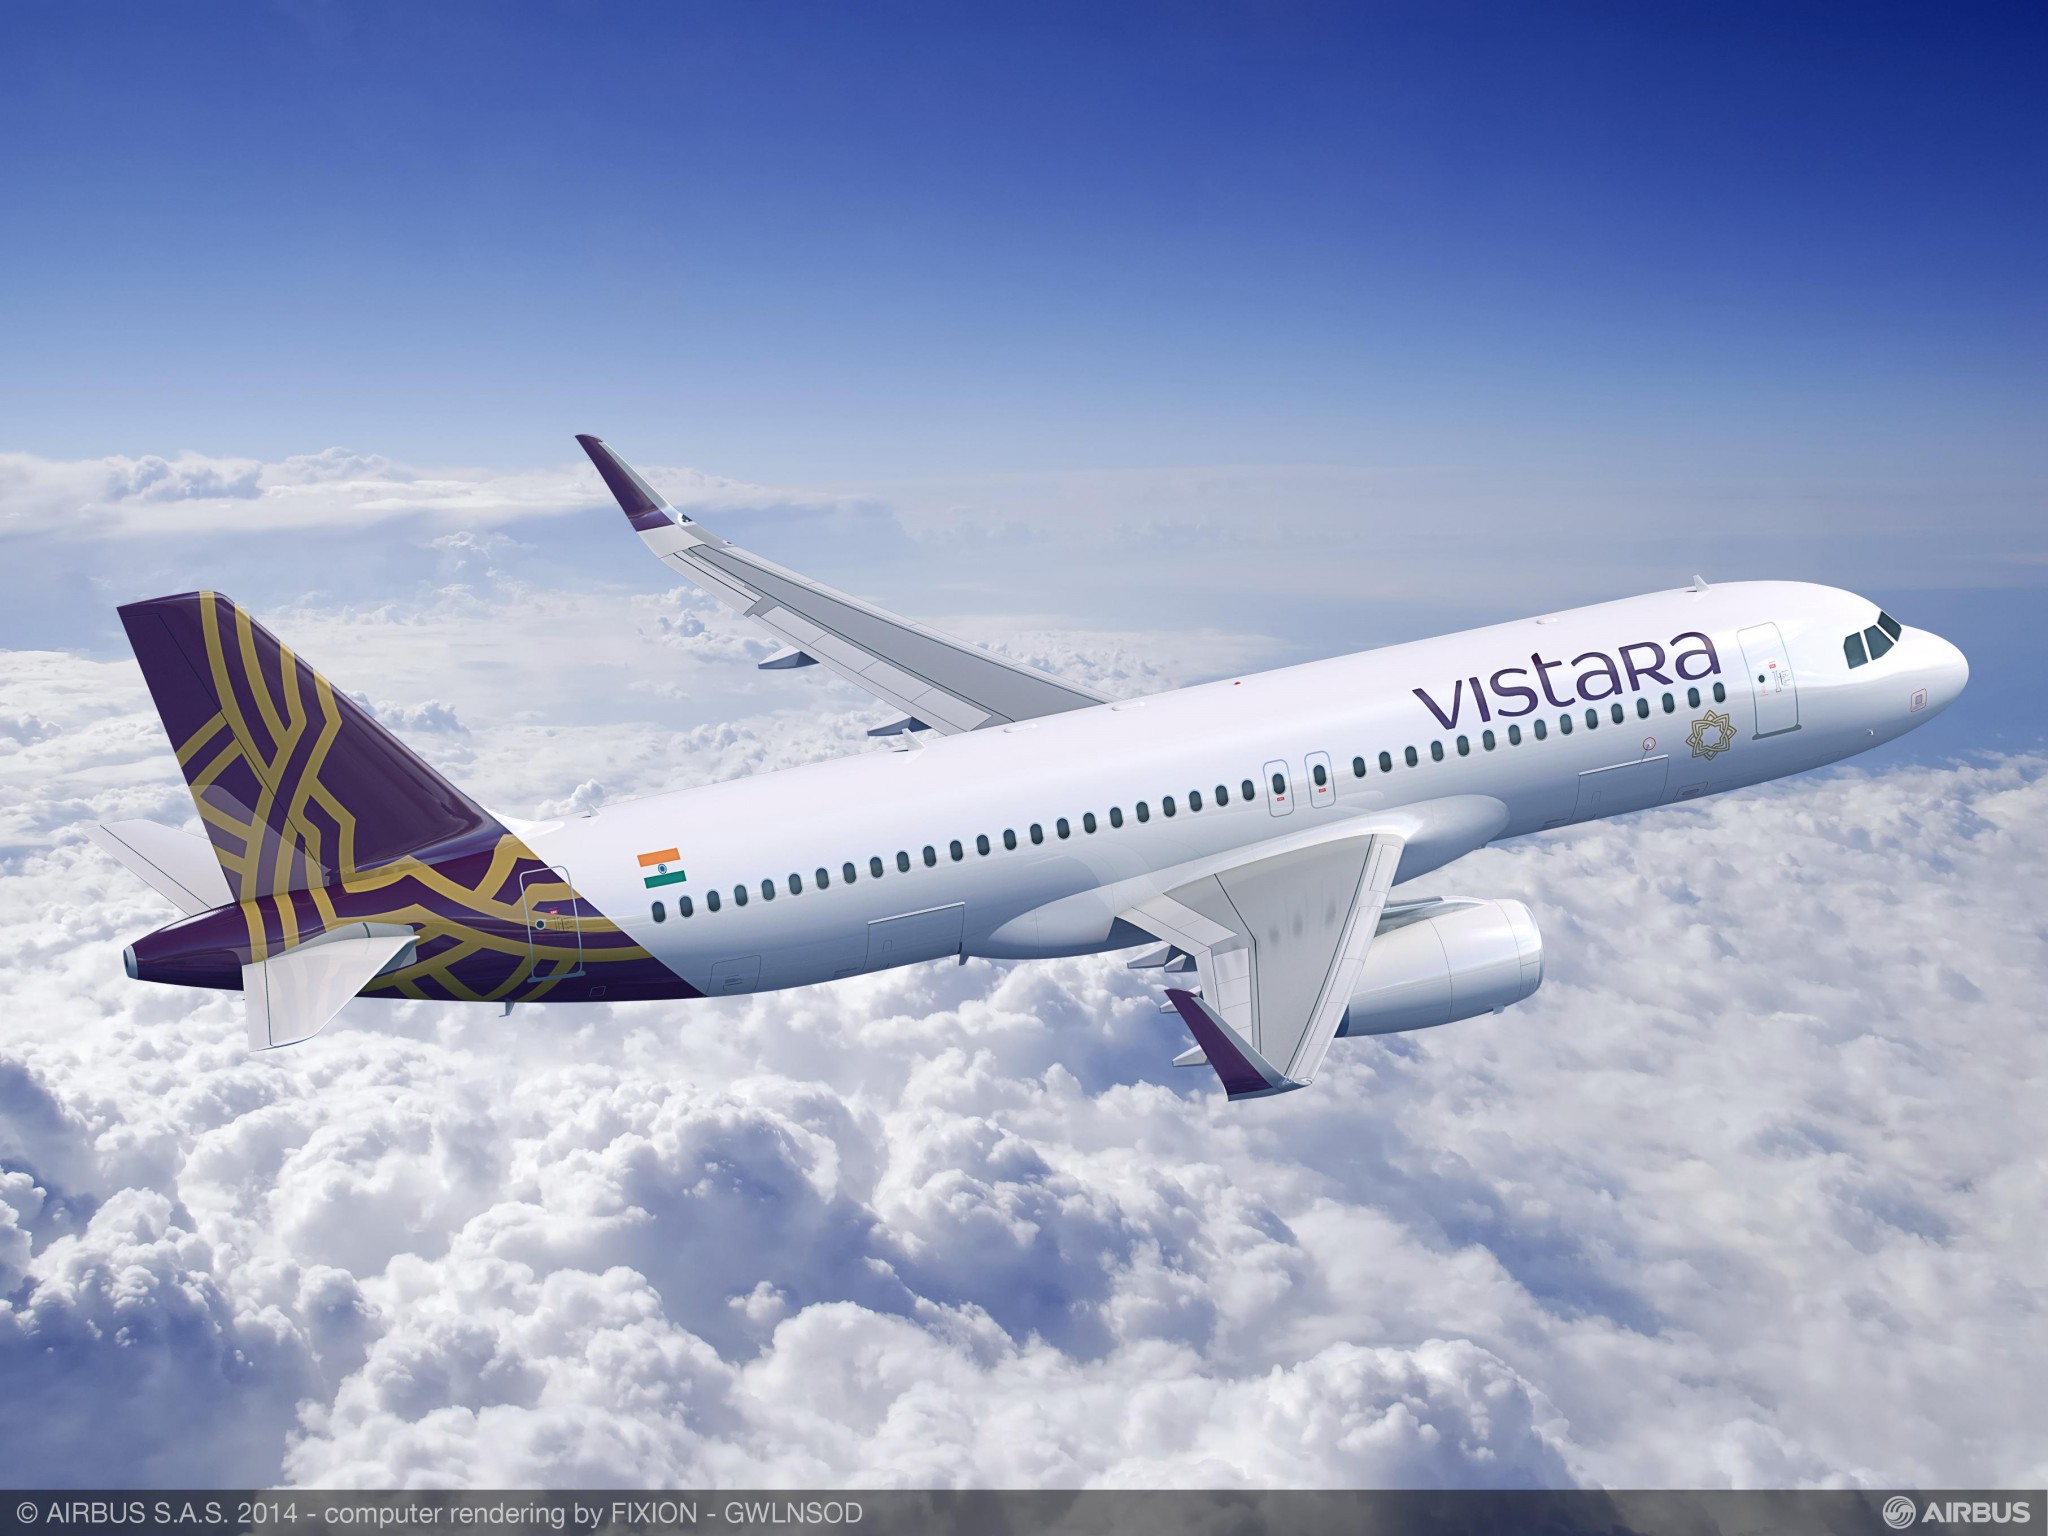 Equity injection for Vistara